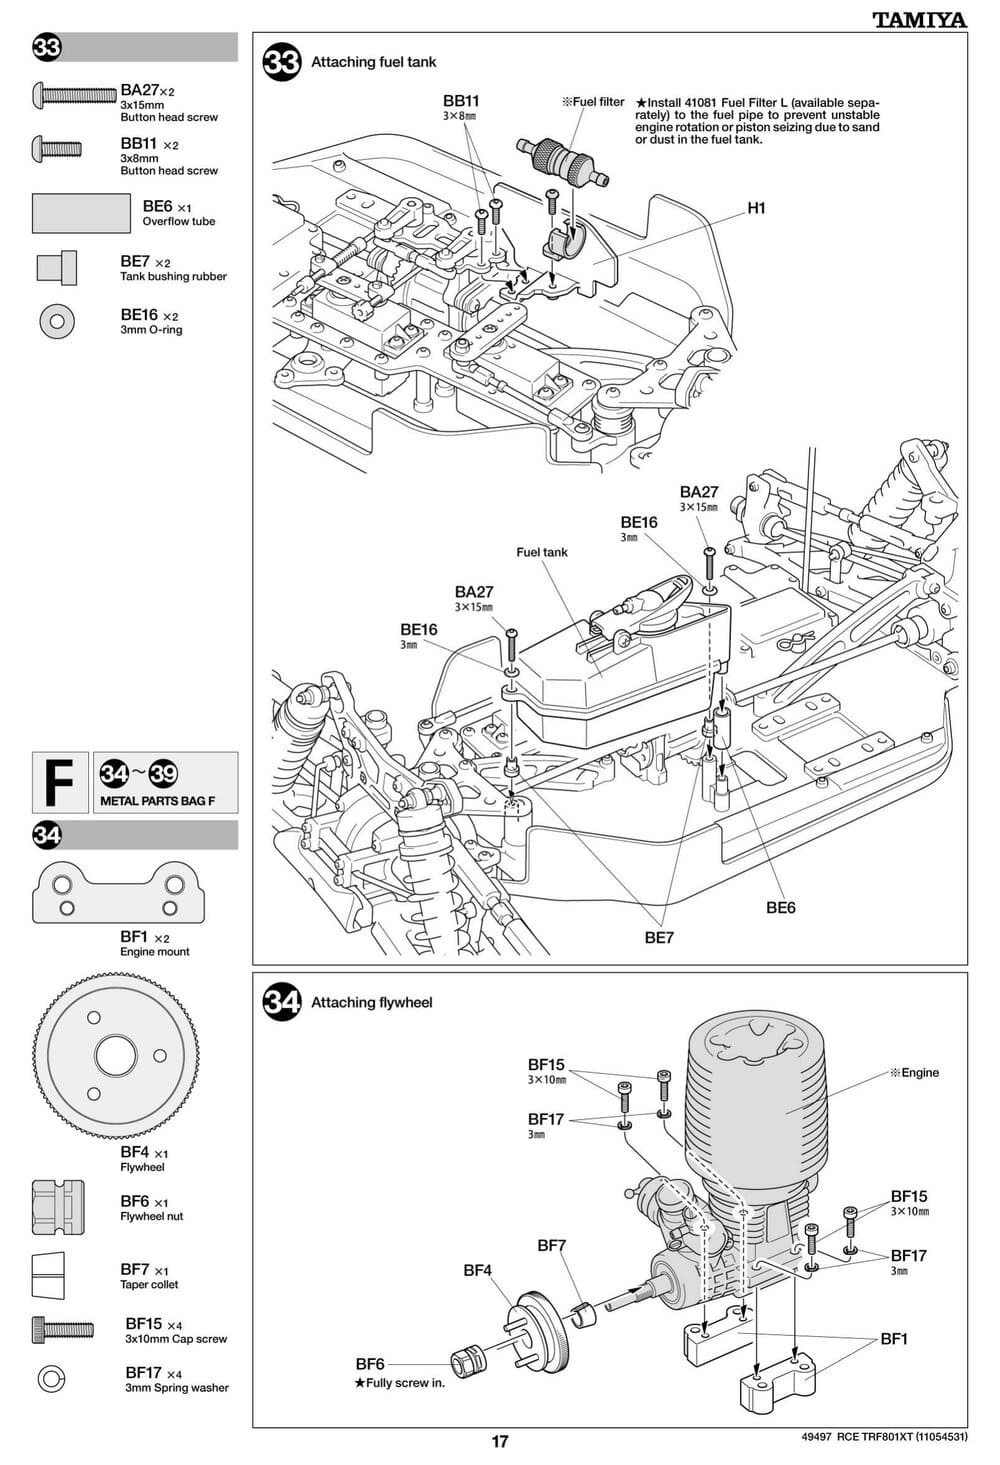 Tamiya - TRF801Xt Performance Package Version Chassis - Manual - Page 17